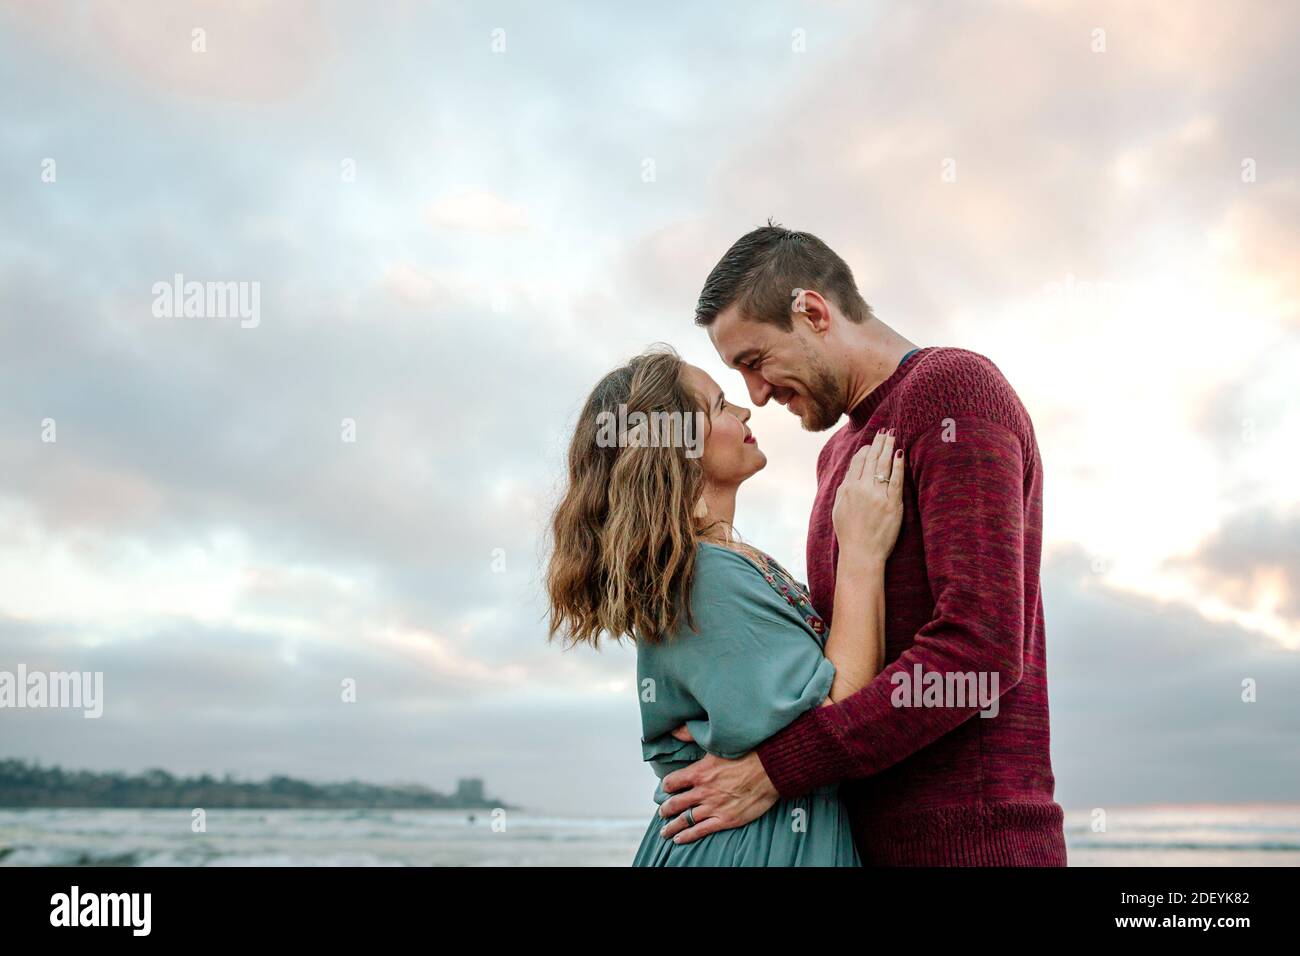 Loving gaze between husband and wife by the  ocean at sunset Stock Photo